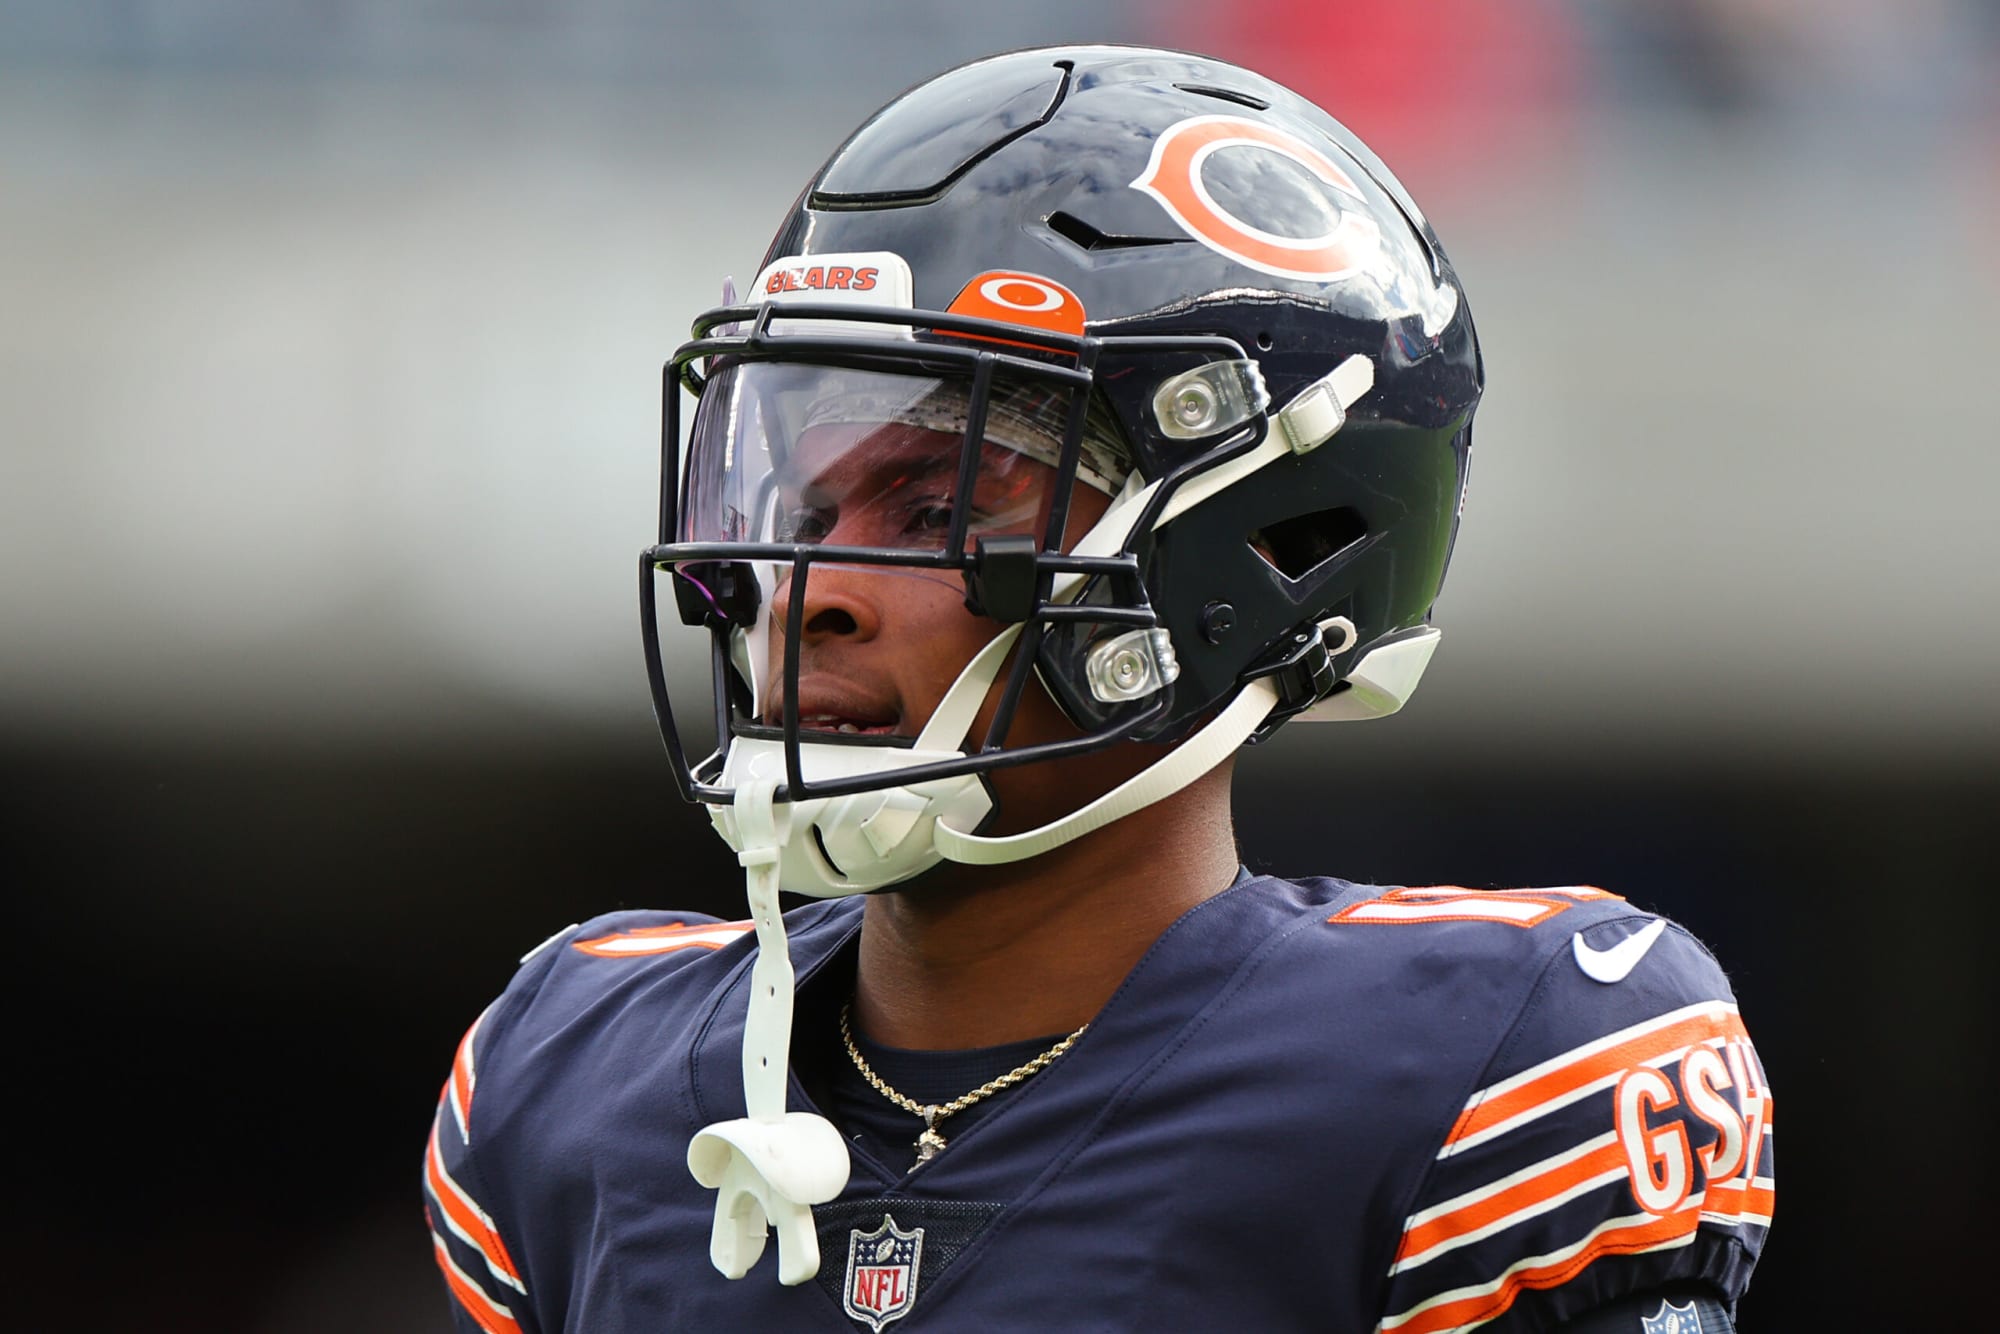 Bears' Justin Fields on lack of chemistry with Darnell Mooney